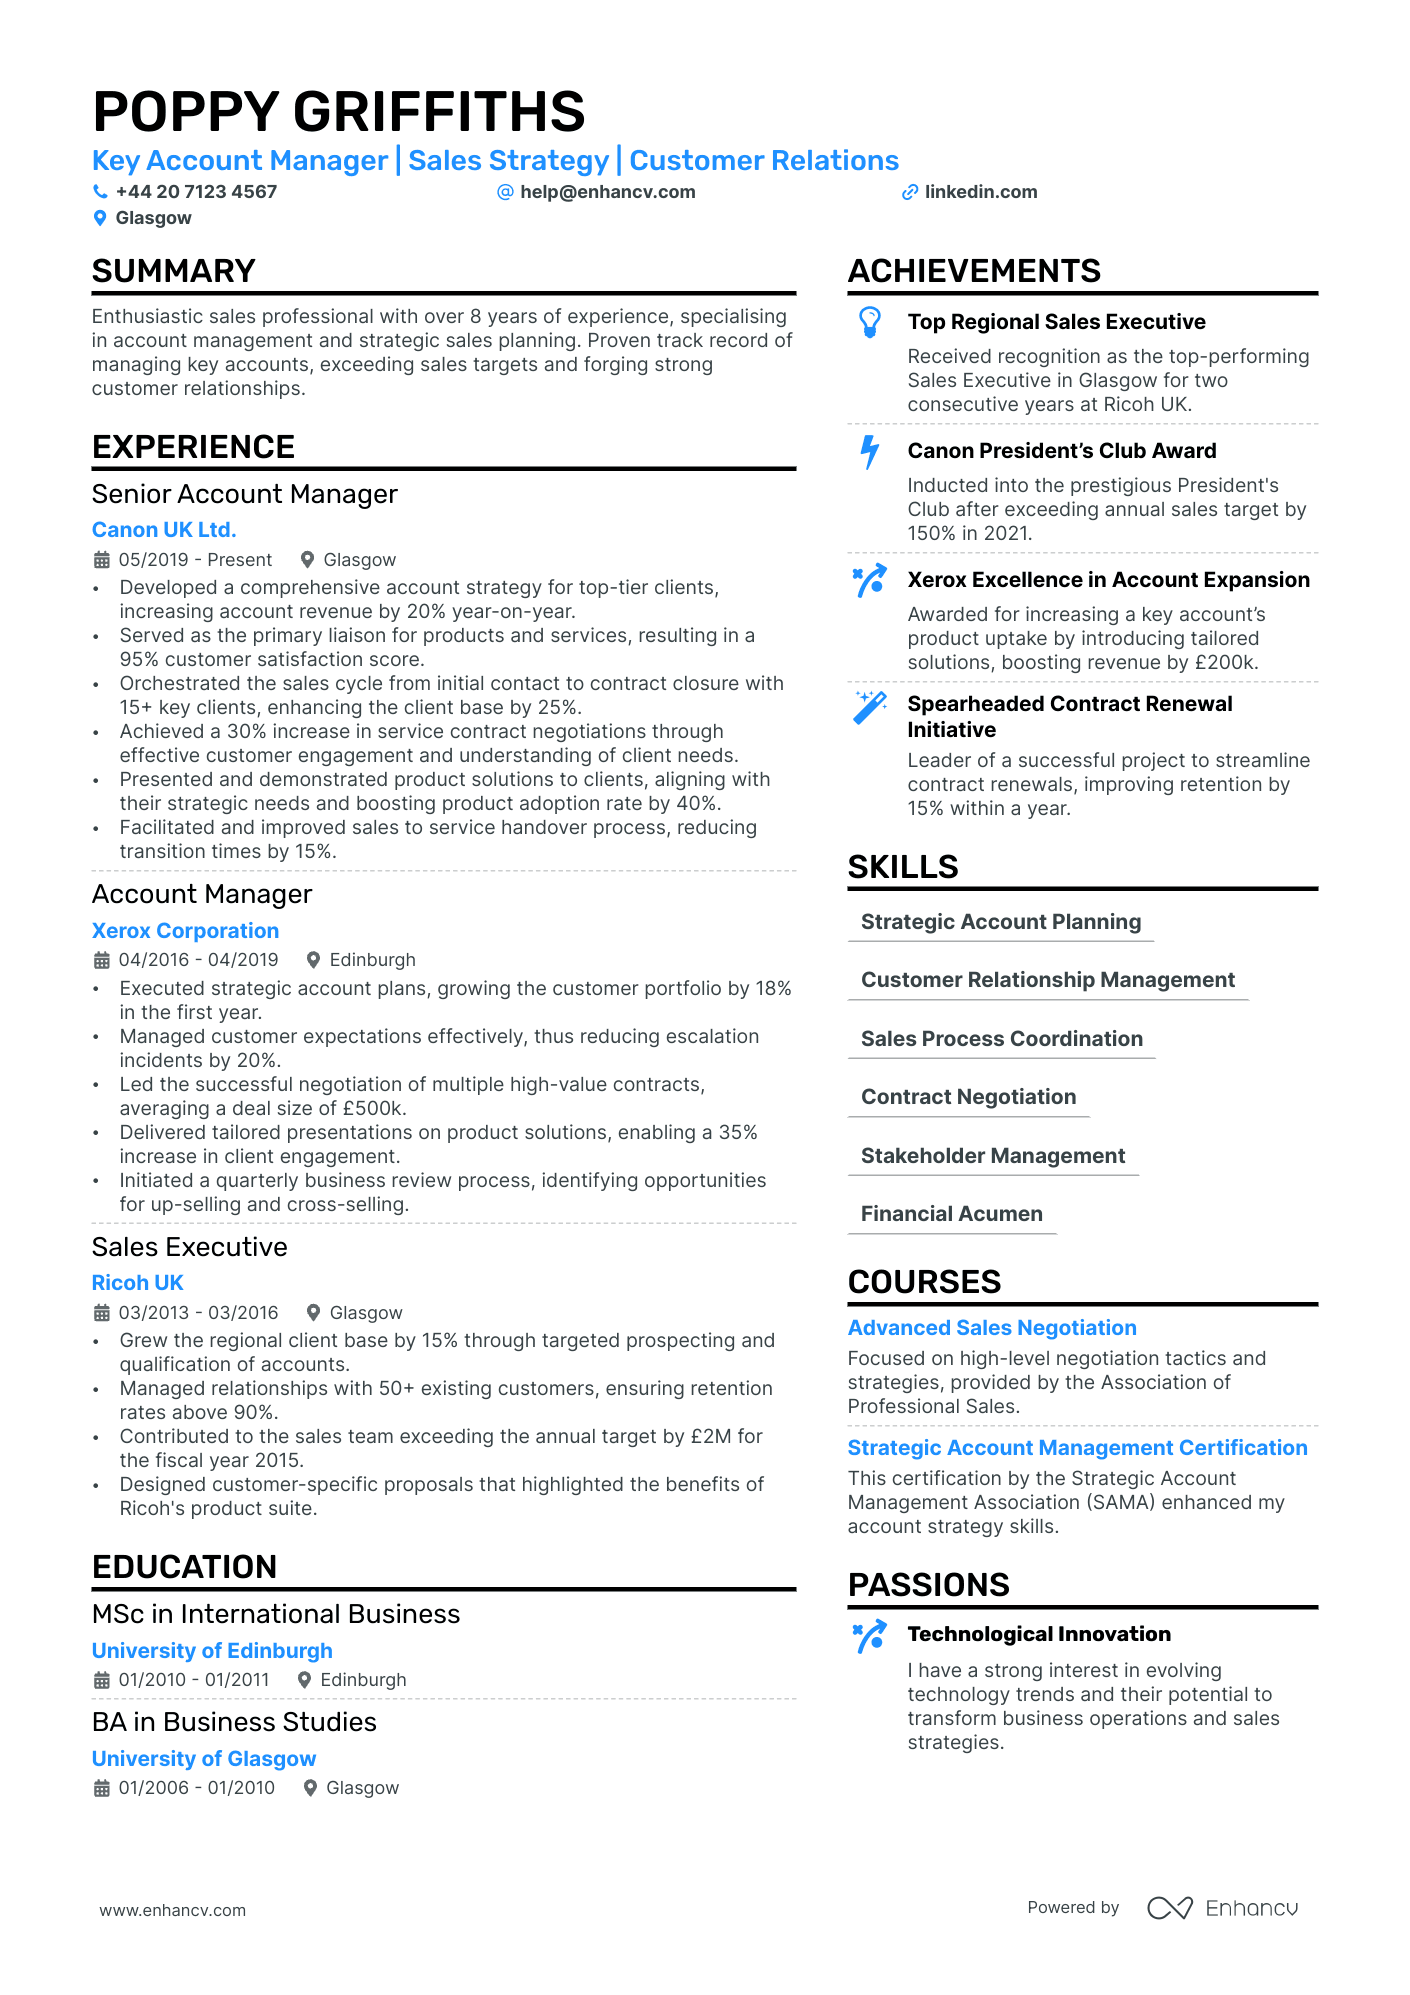 Key Account Manager cv example